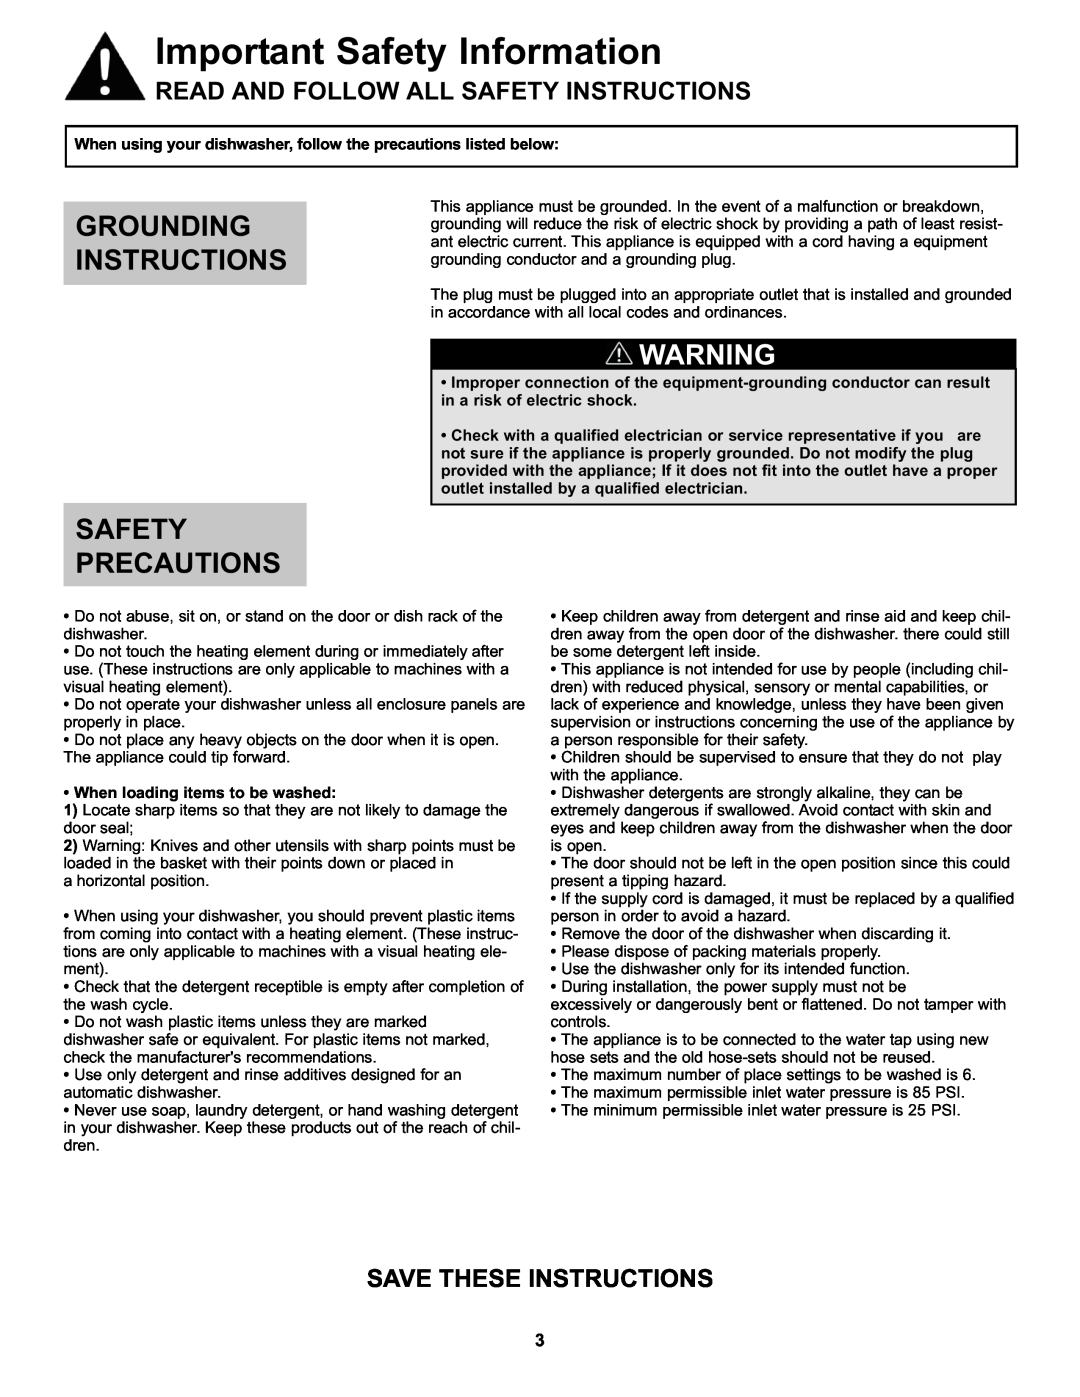 Danby DDW611WLED manual Important Safety Information, Grounding Instructions, Safety Precautions, Save These Instructions 